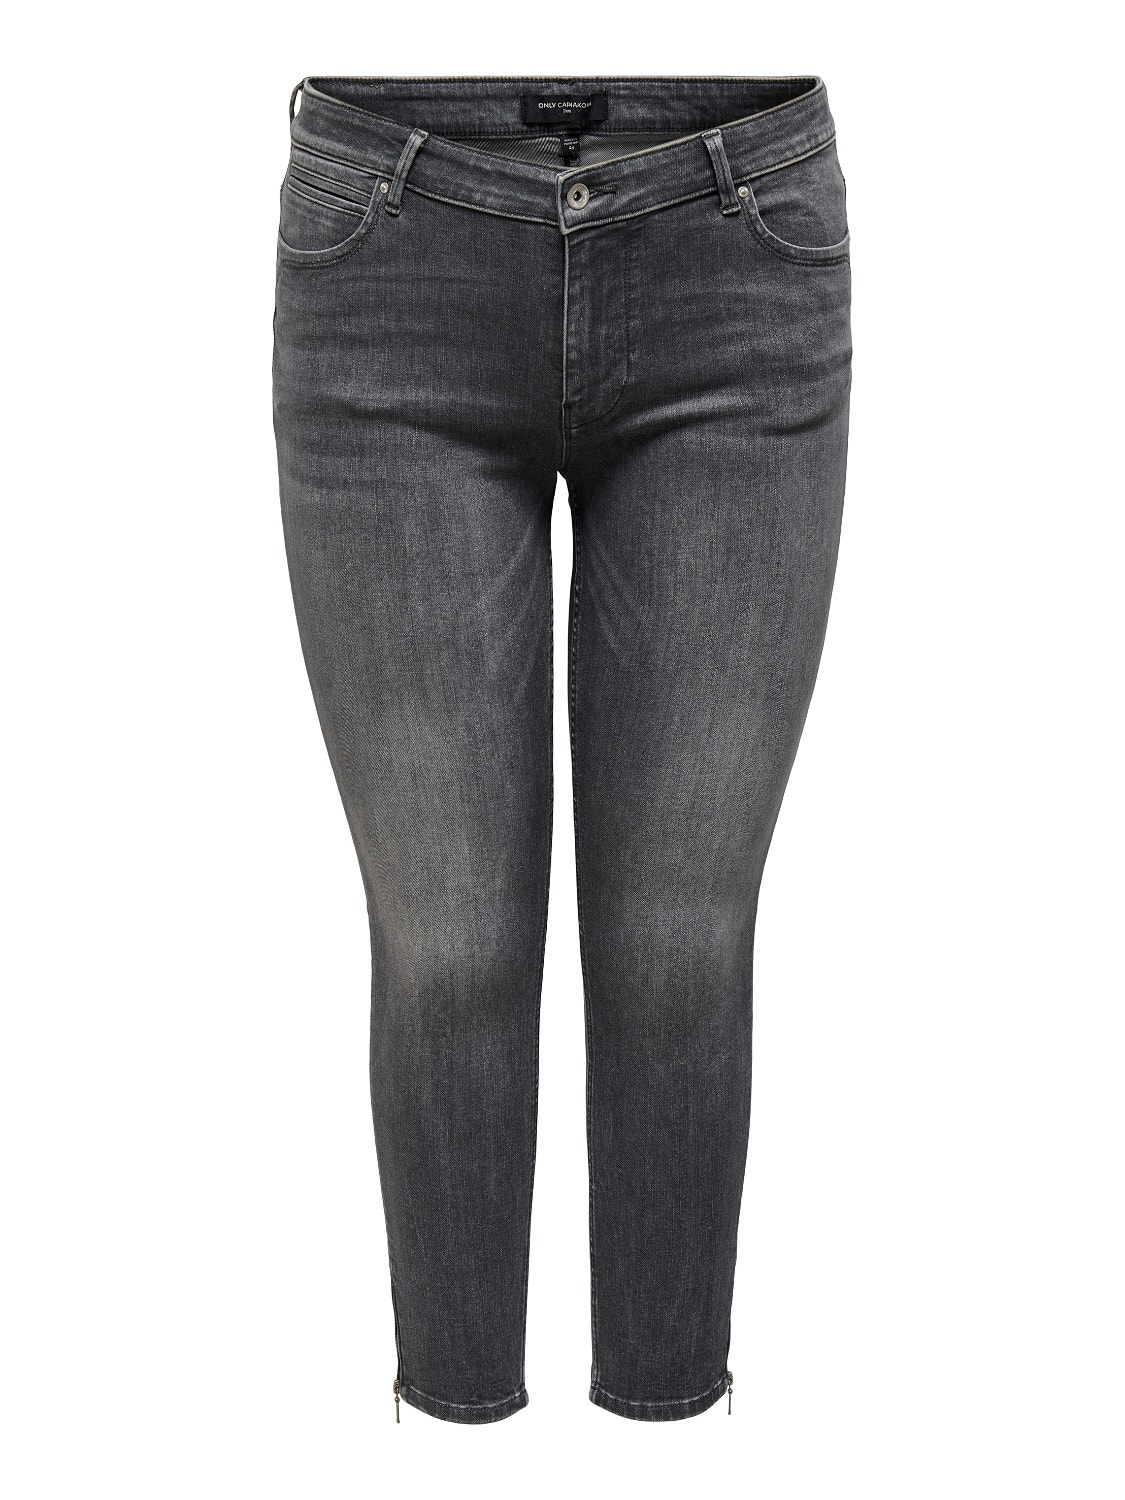 ONLY Jeans Skinny Fit Taille moyenne Curve -Medium Grey Denim - 15259954